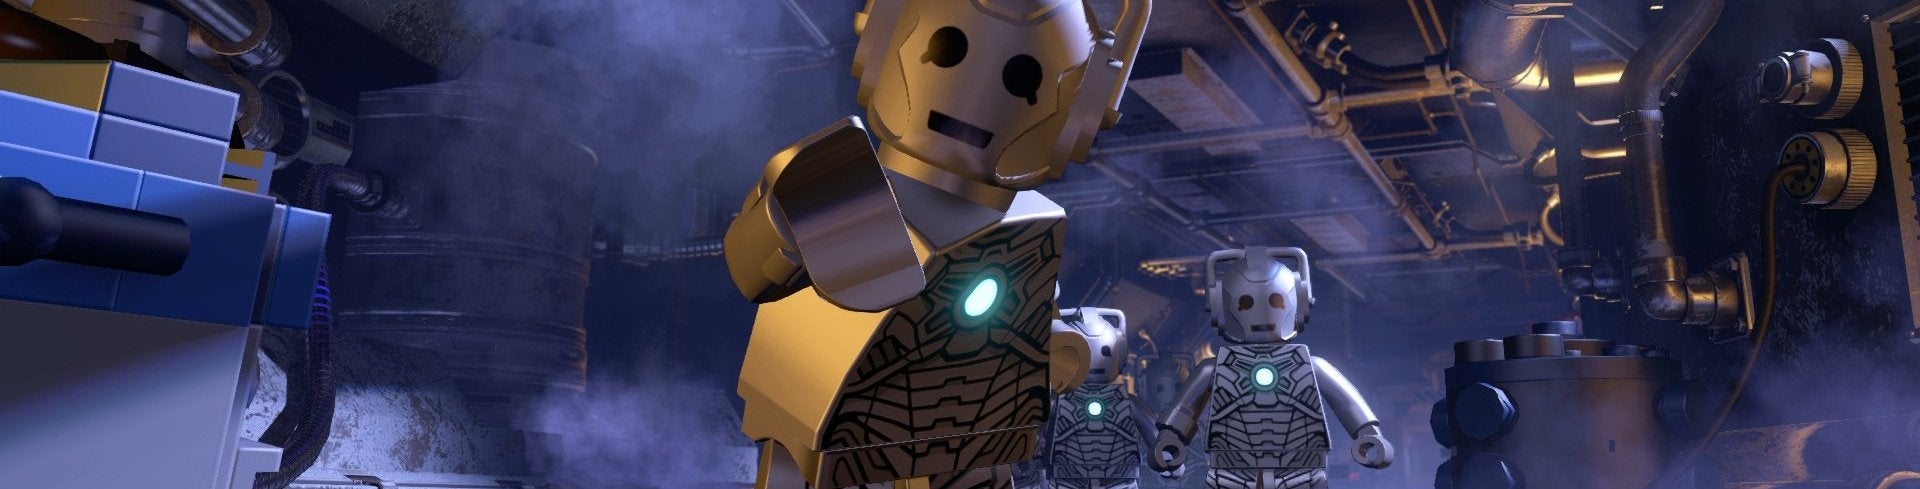 Image for Lego Dimensions review